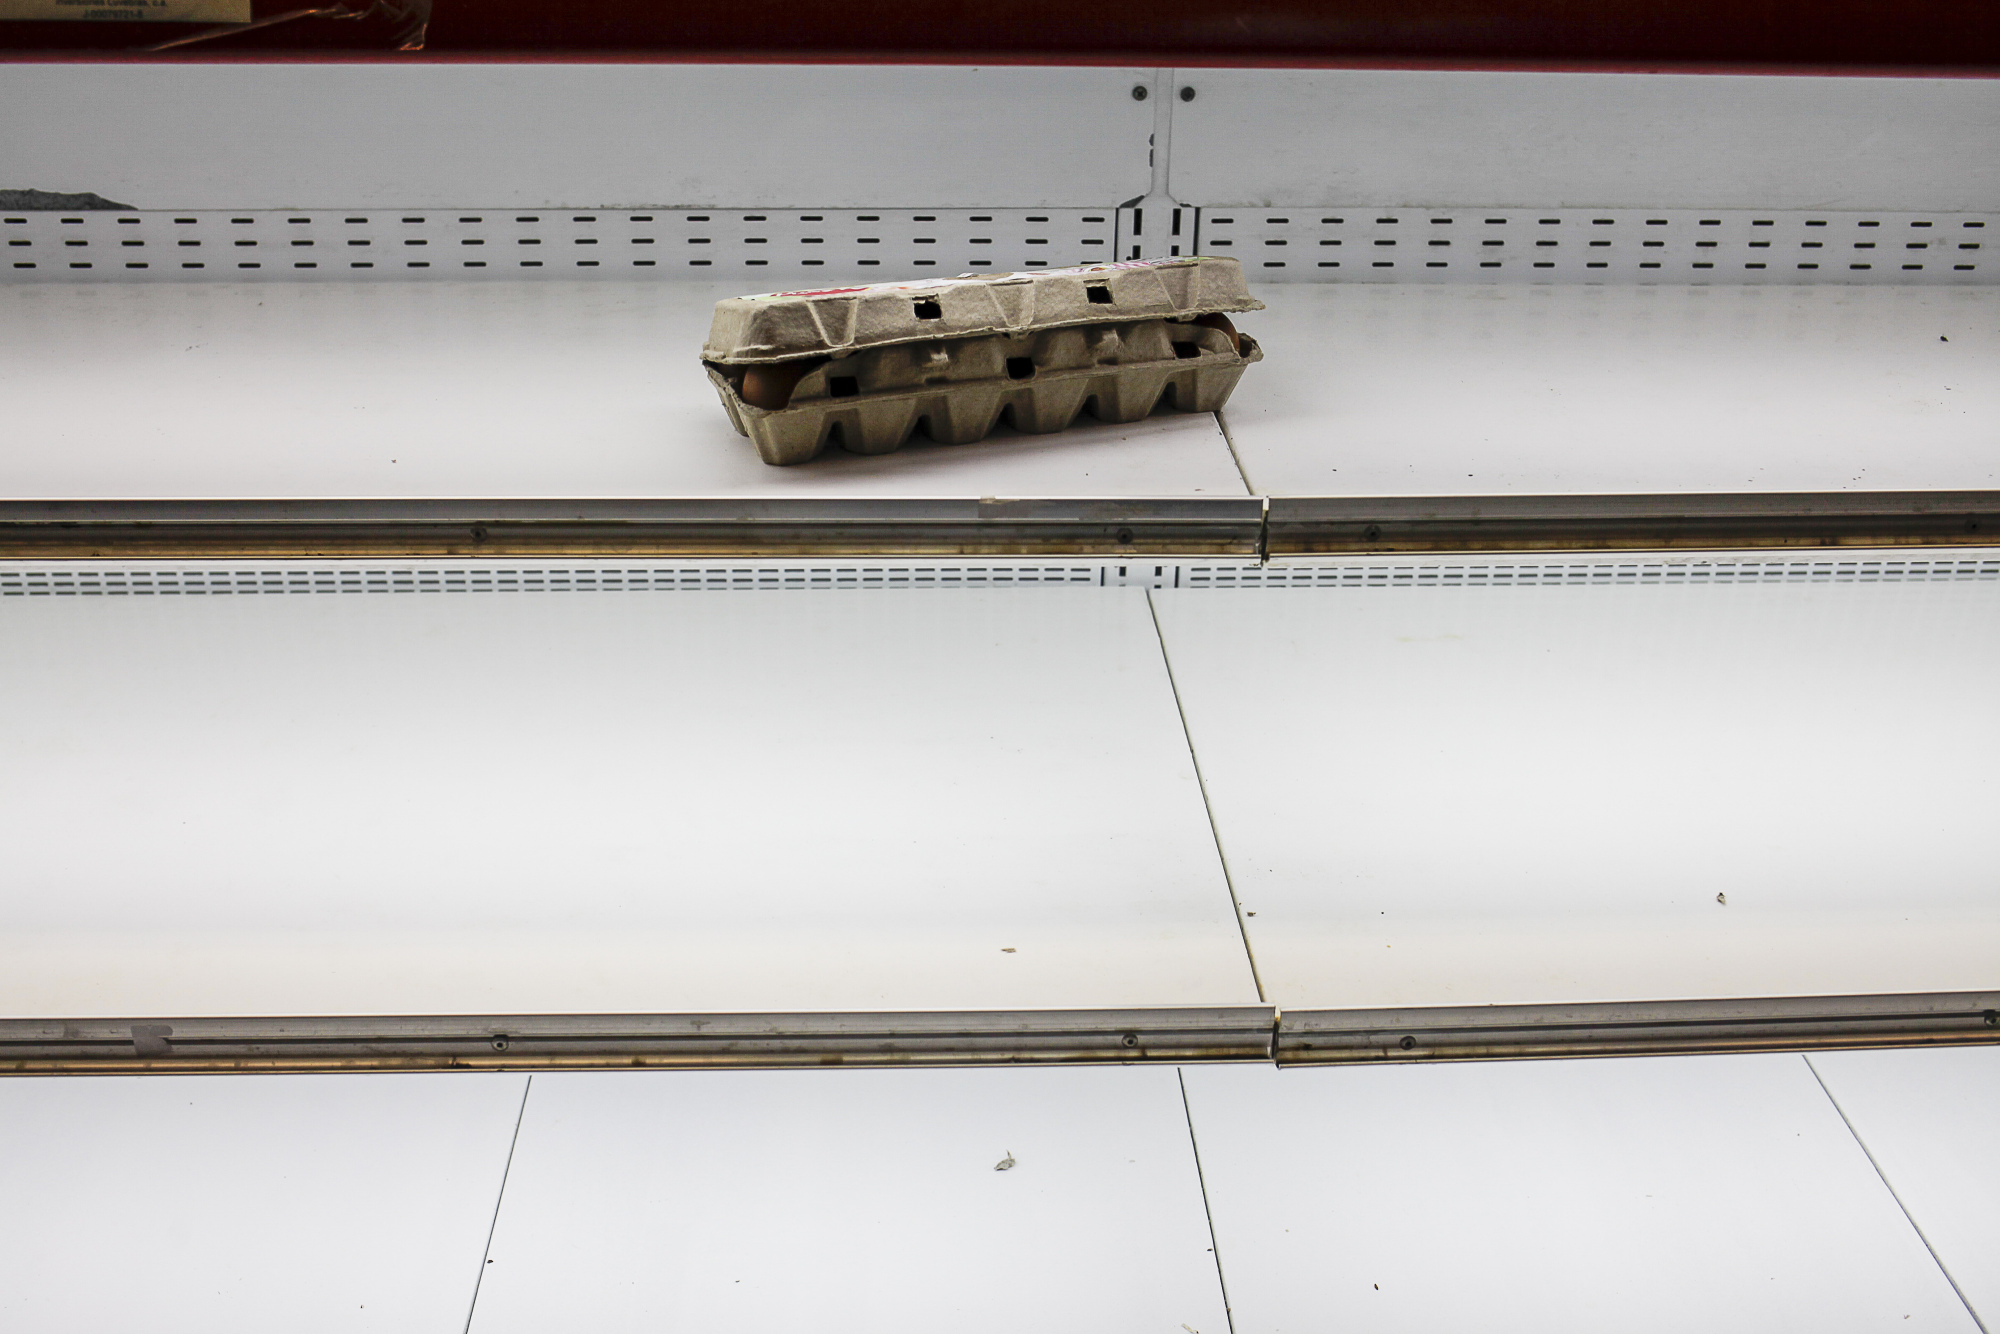 A carton of eggs sits on an empty shelf at a supermarket in the Chacao district of Caracas, Venezuela, on Aug. 24, 2017.
